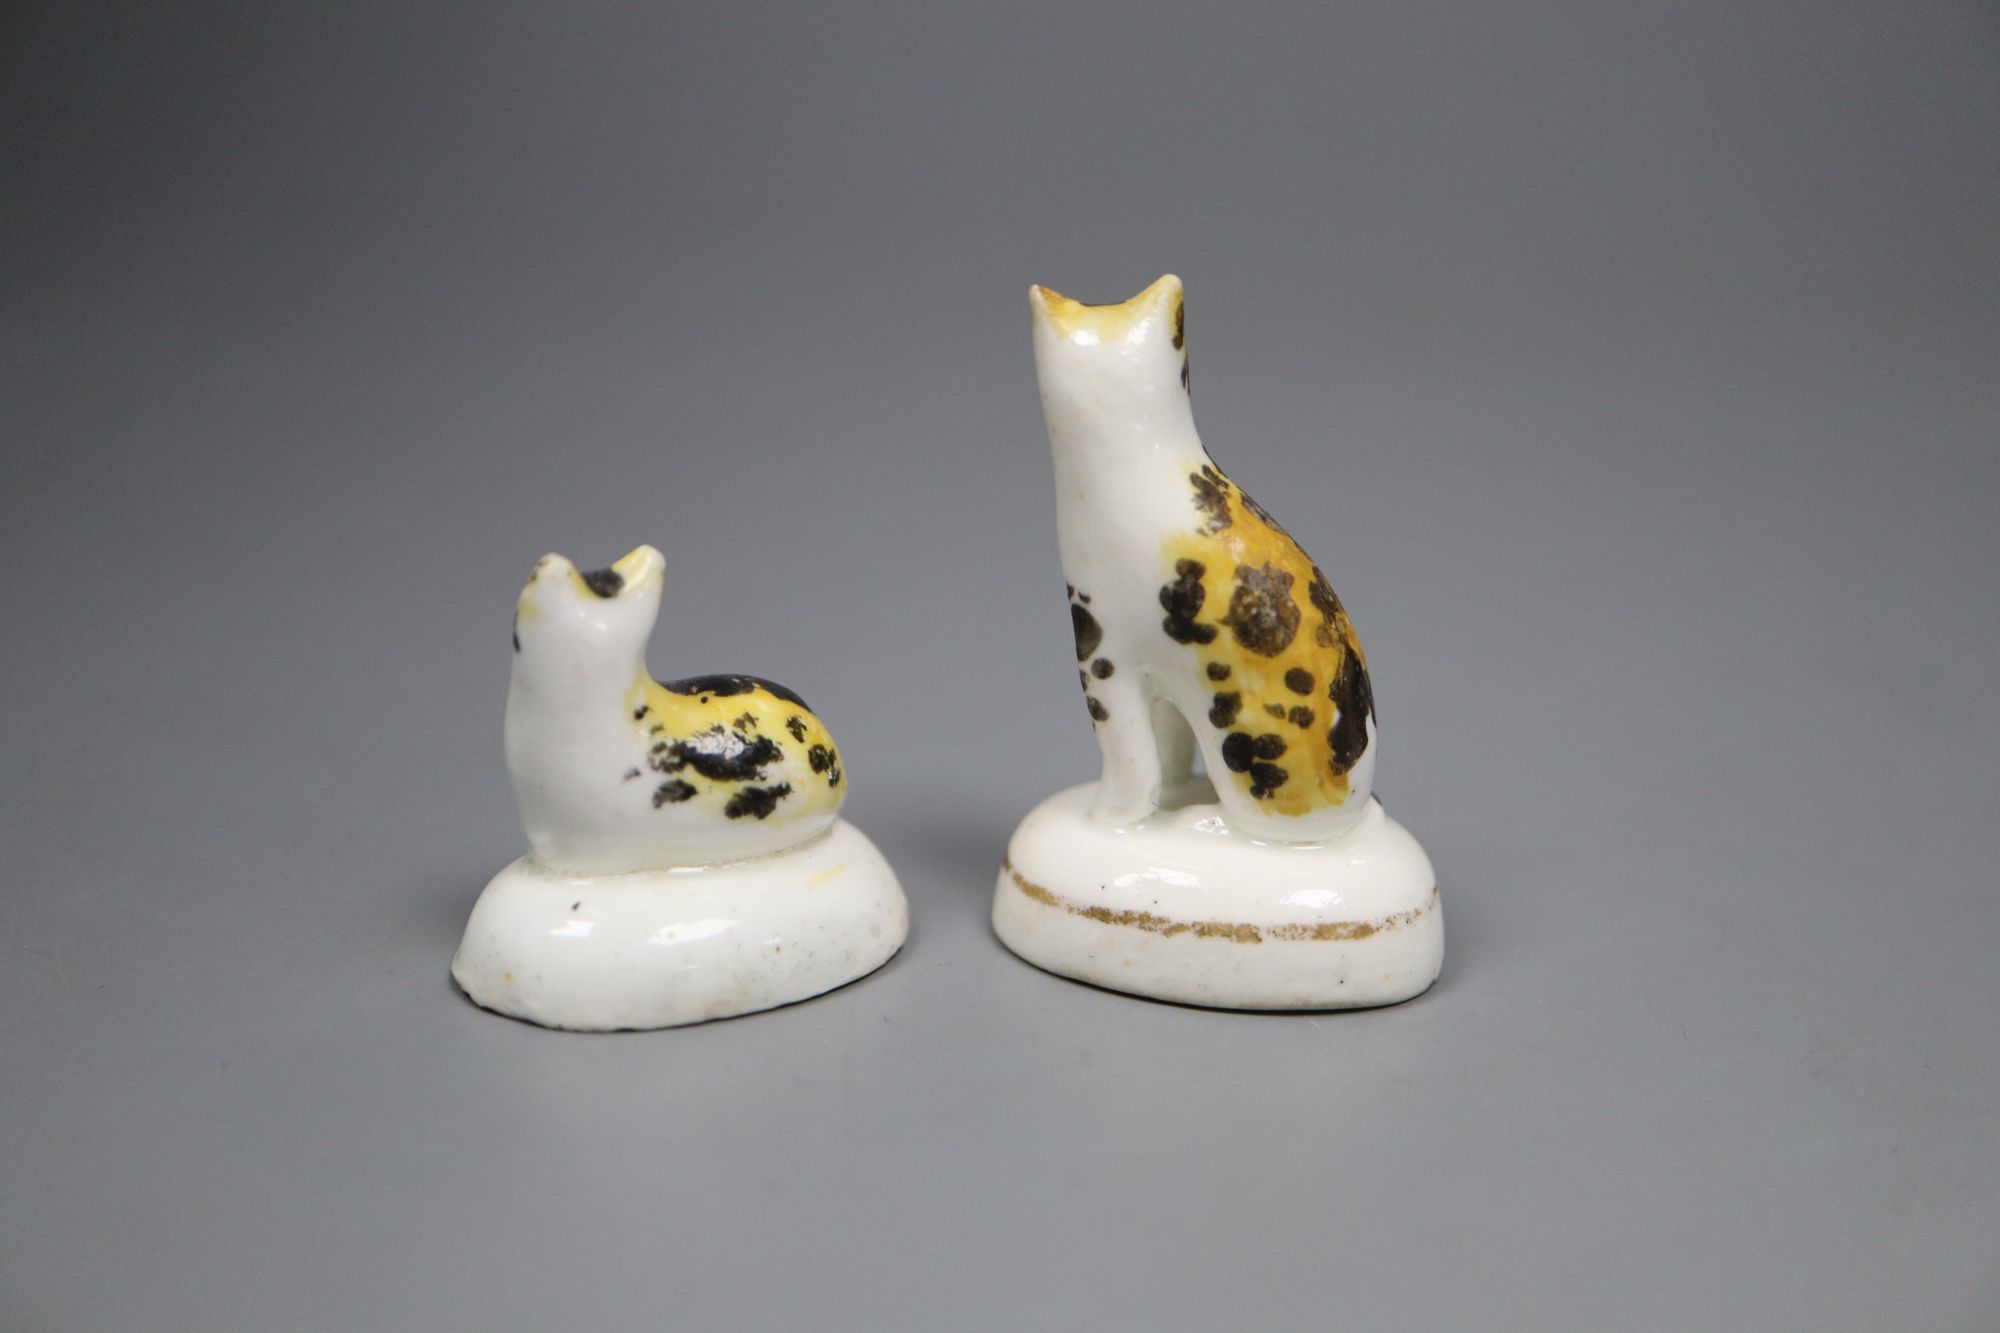 Two Staffordshire porcelain figures of kittens, c.1835-50, 3cm and 4.6cm high